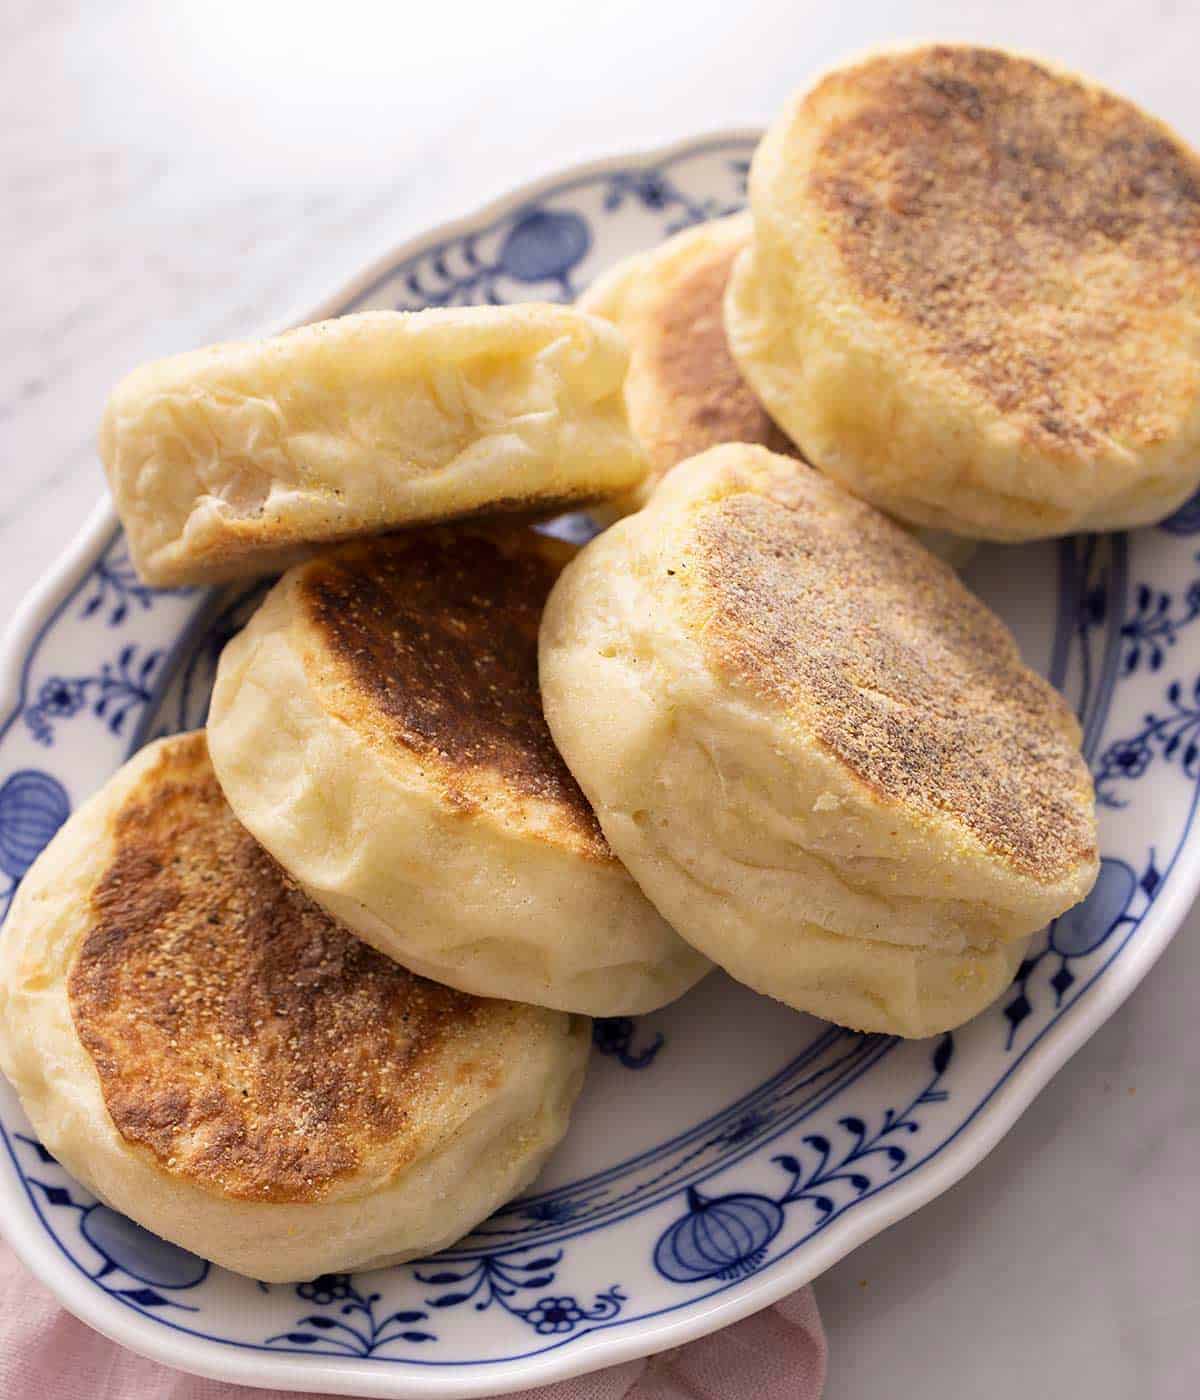 A pile of English Muffins on a blue serving plate